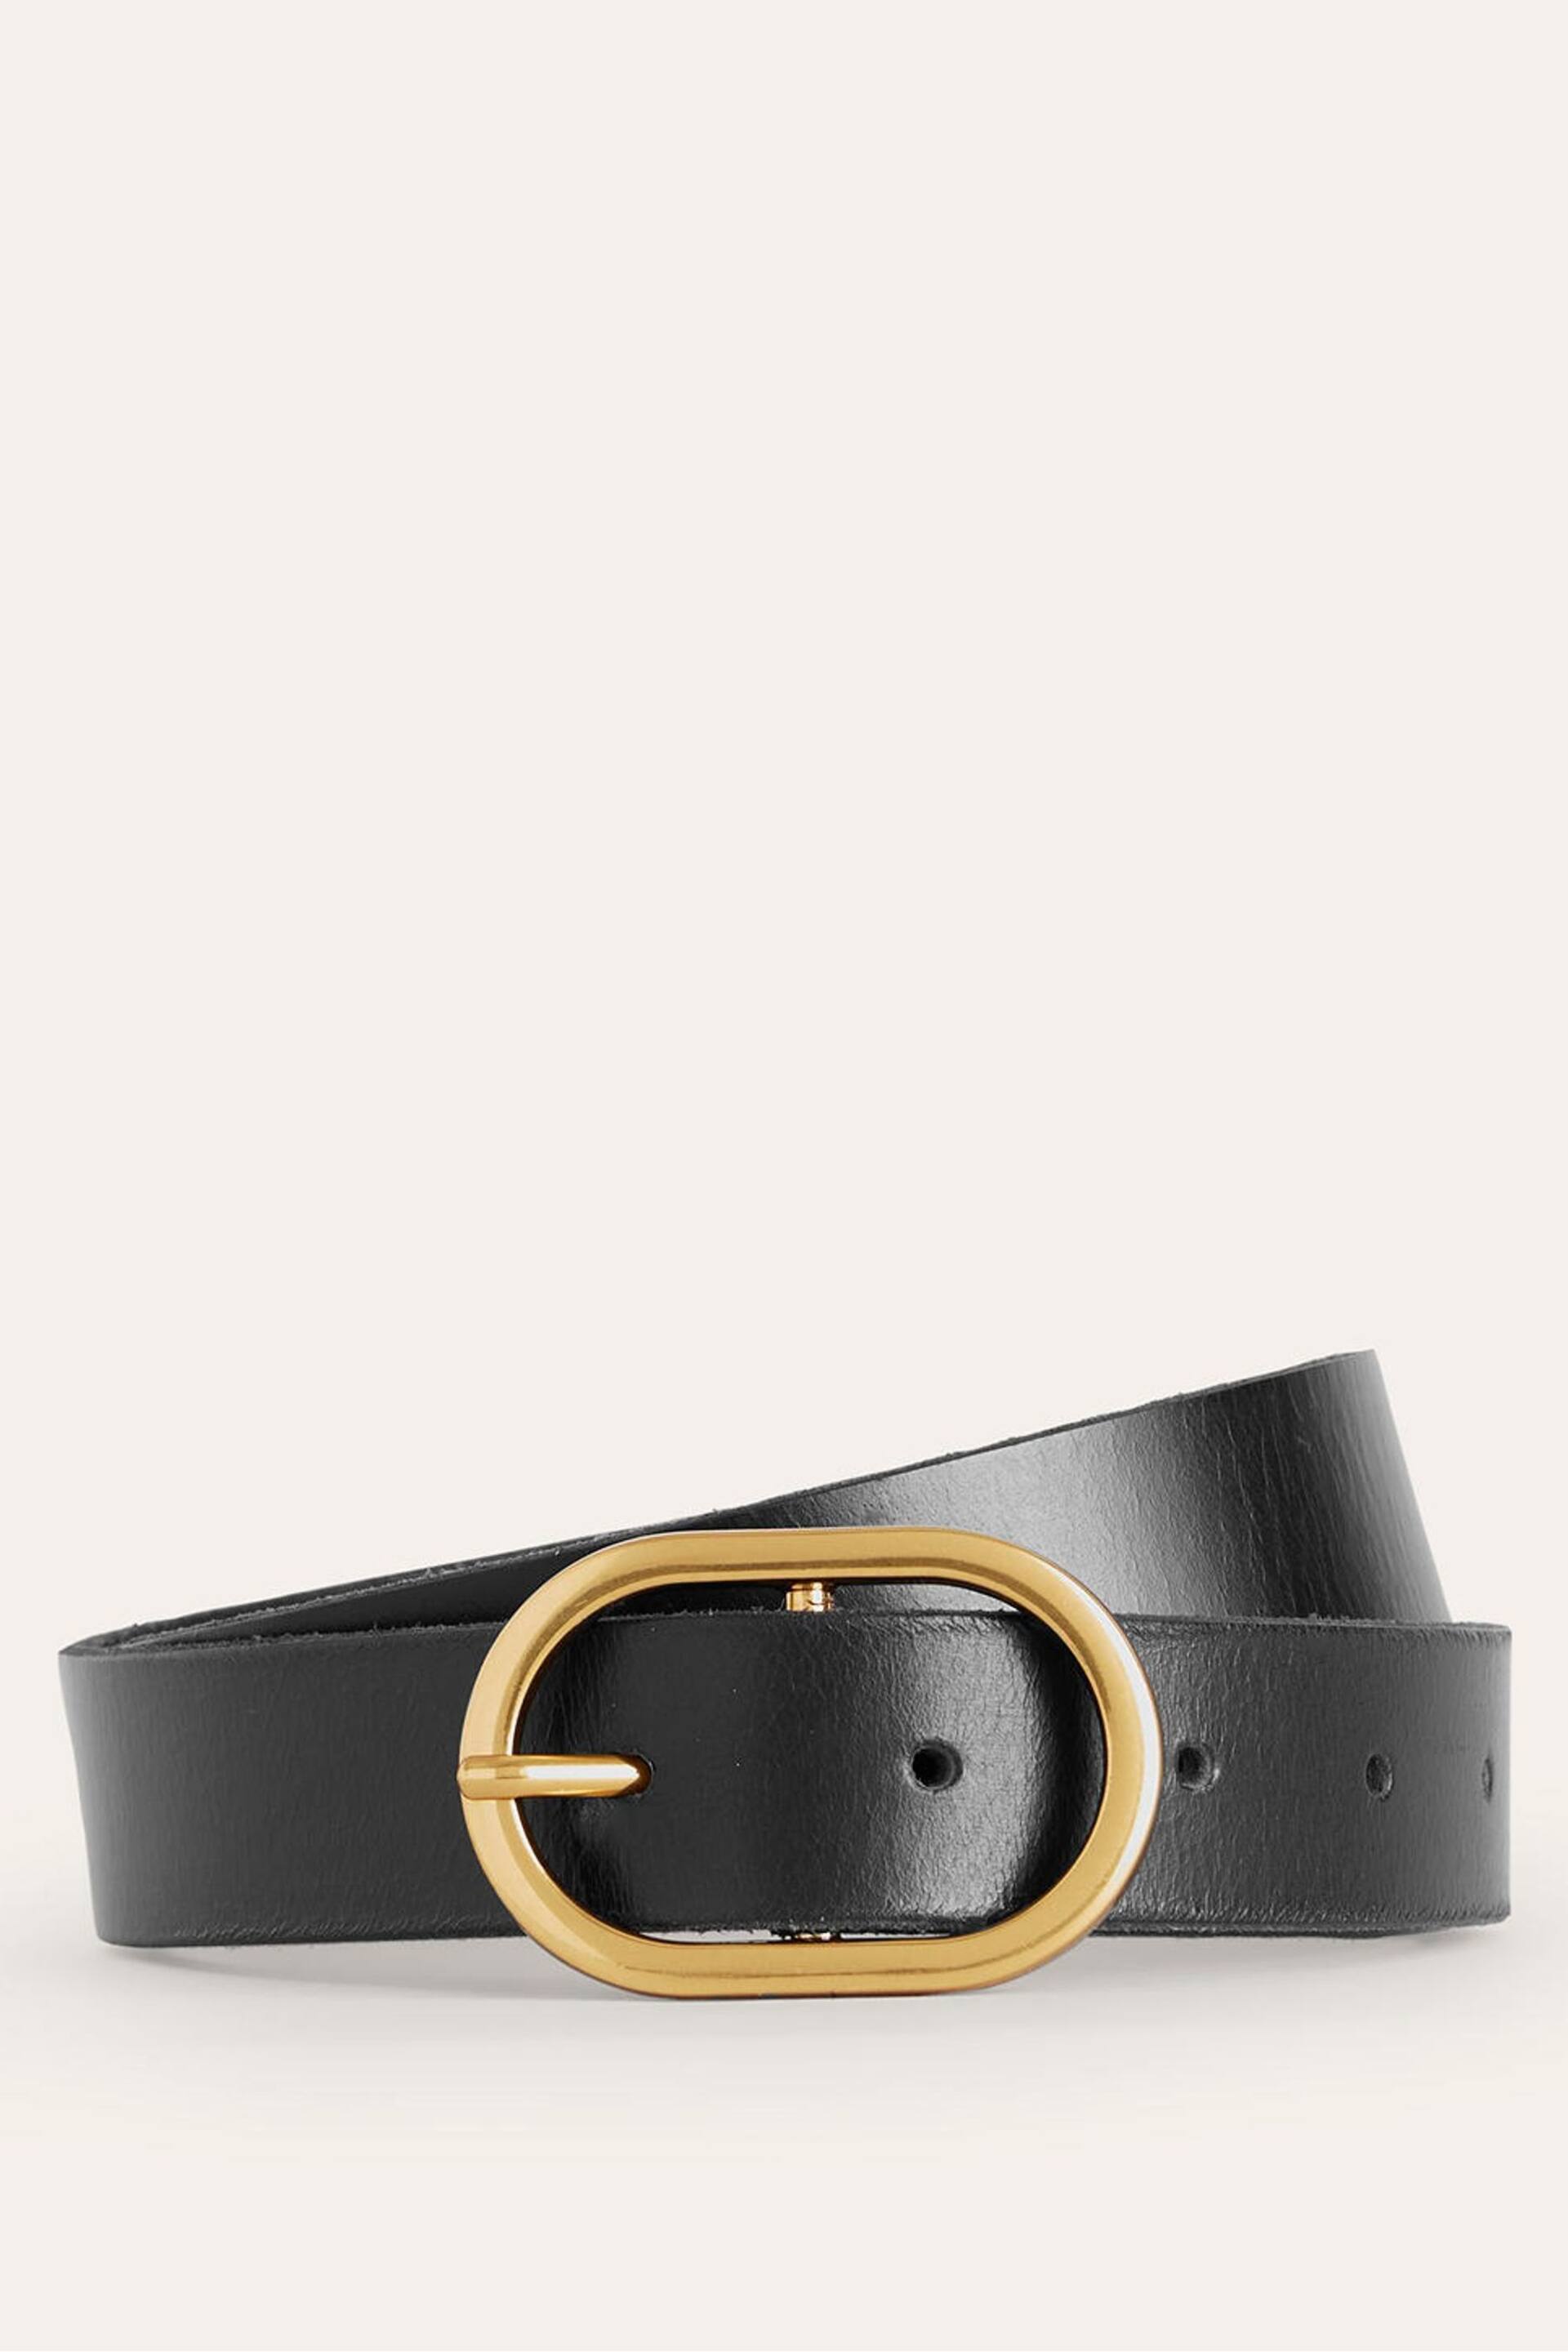 Boden Black Classic Leather Belt - Image 1 of 4